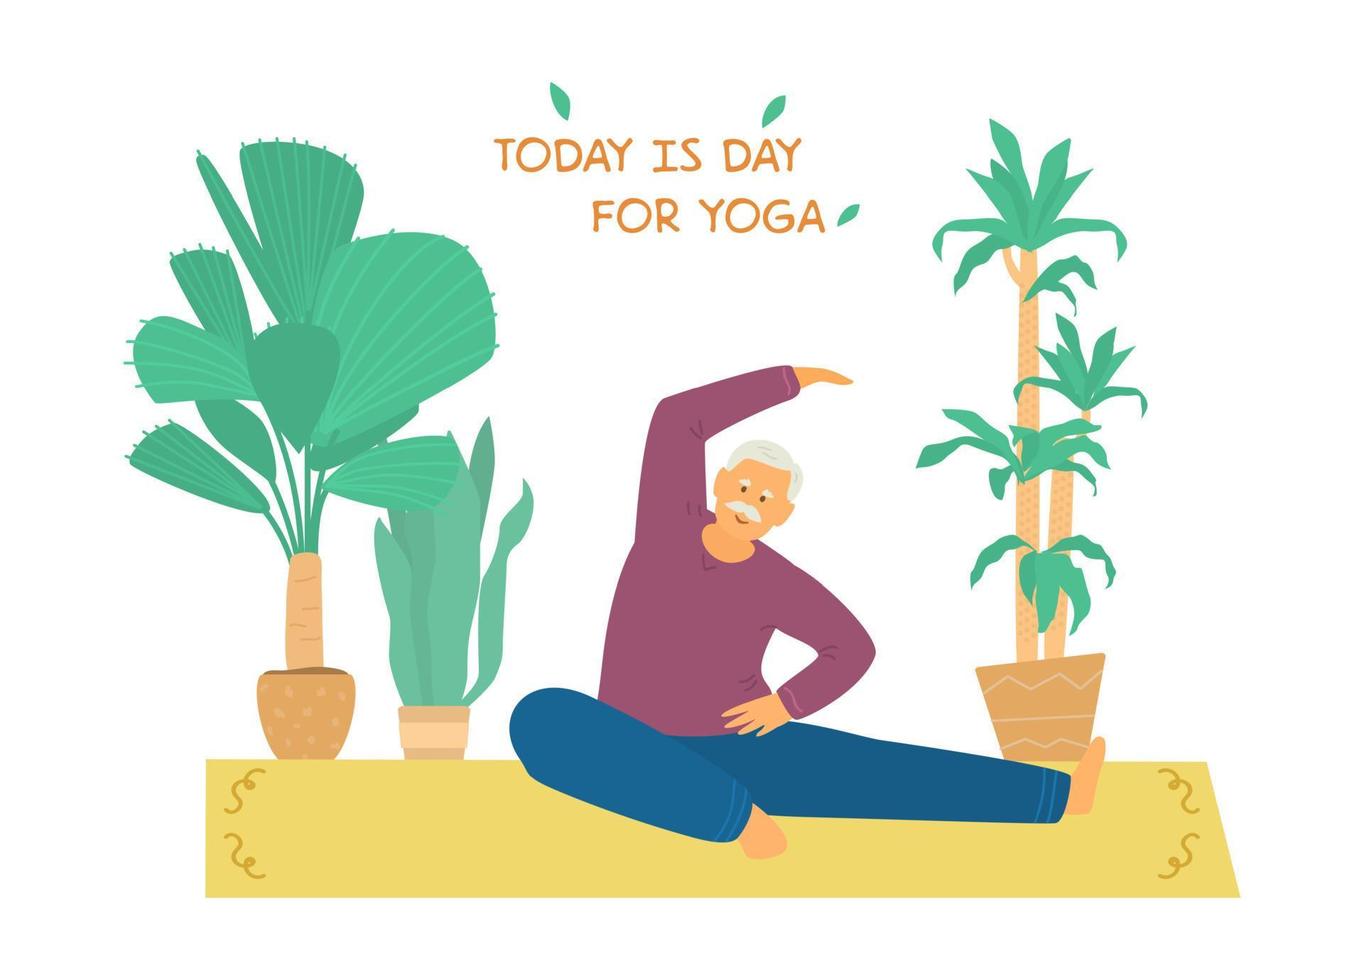 Smiling old man stretching or practicing yoga on mat surrounded with plants. Active retirement. Motivational banner for seniors. Flat vector illustration.